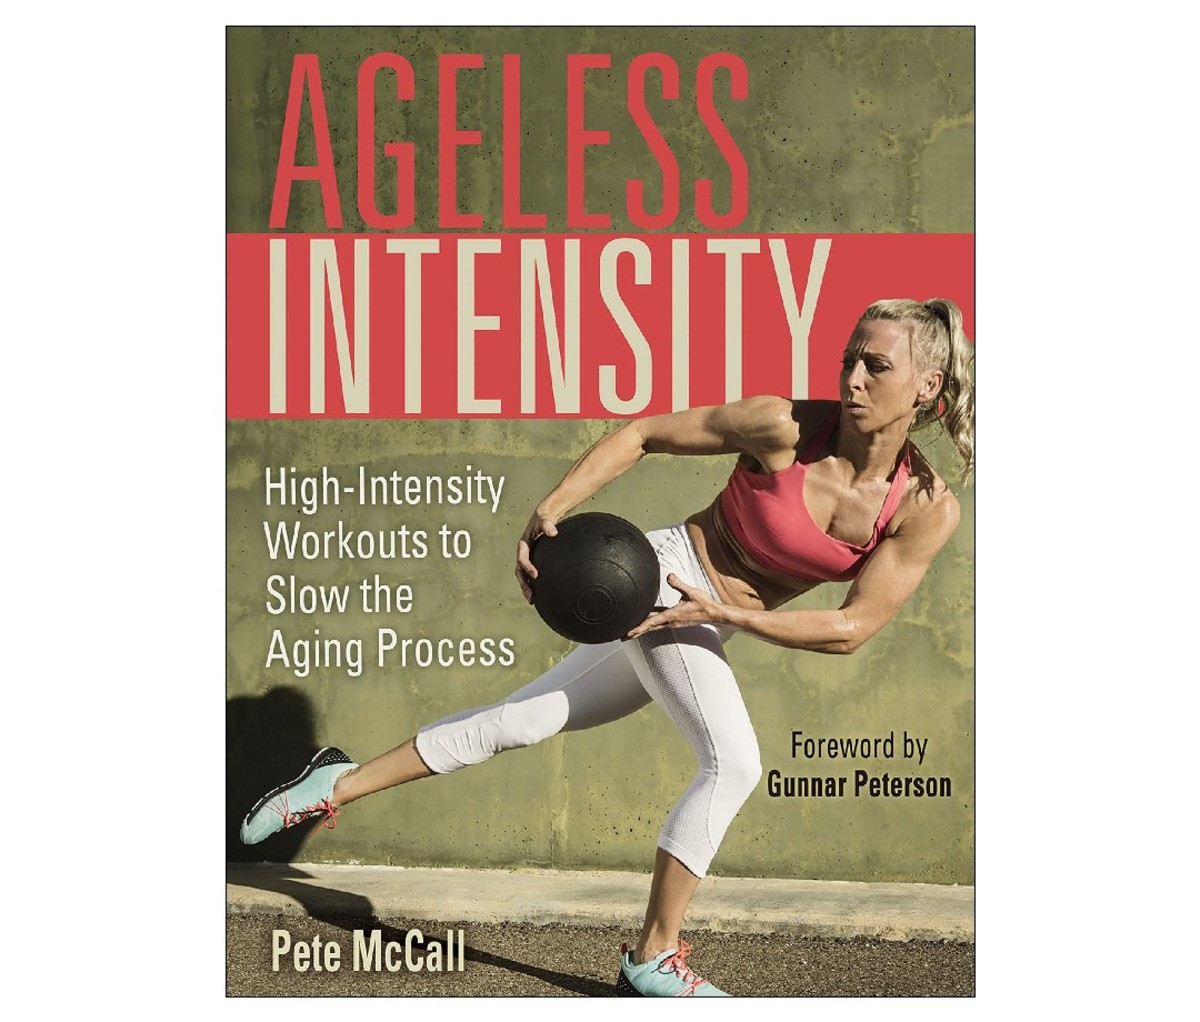 Ageless Intensity: High-Intensity Workouts to Slow the Aging Process by Pete McCall